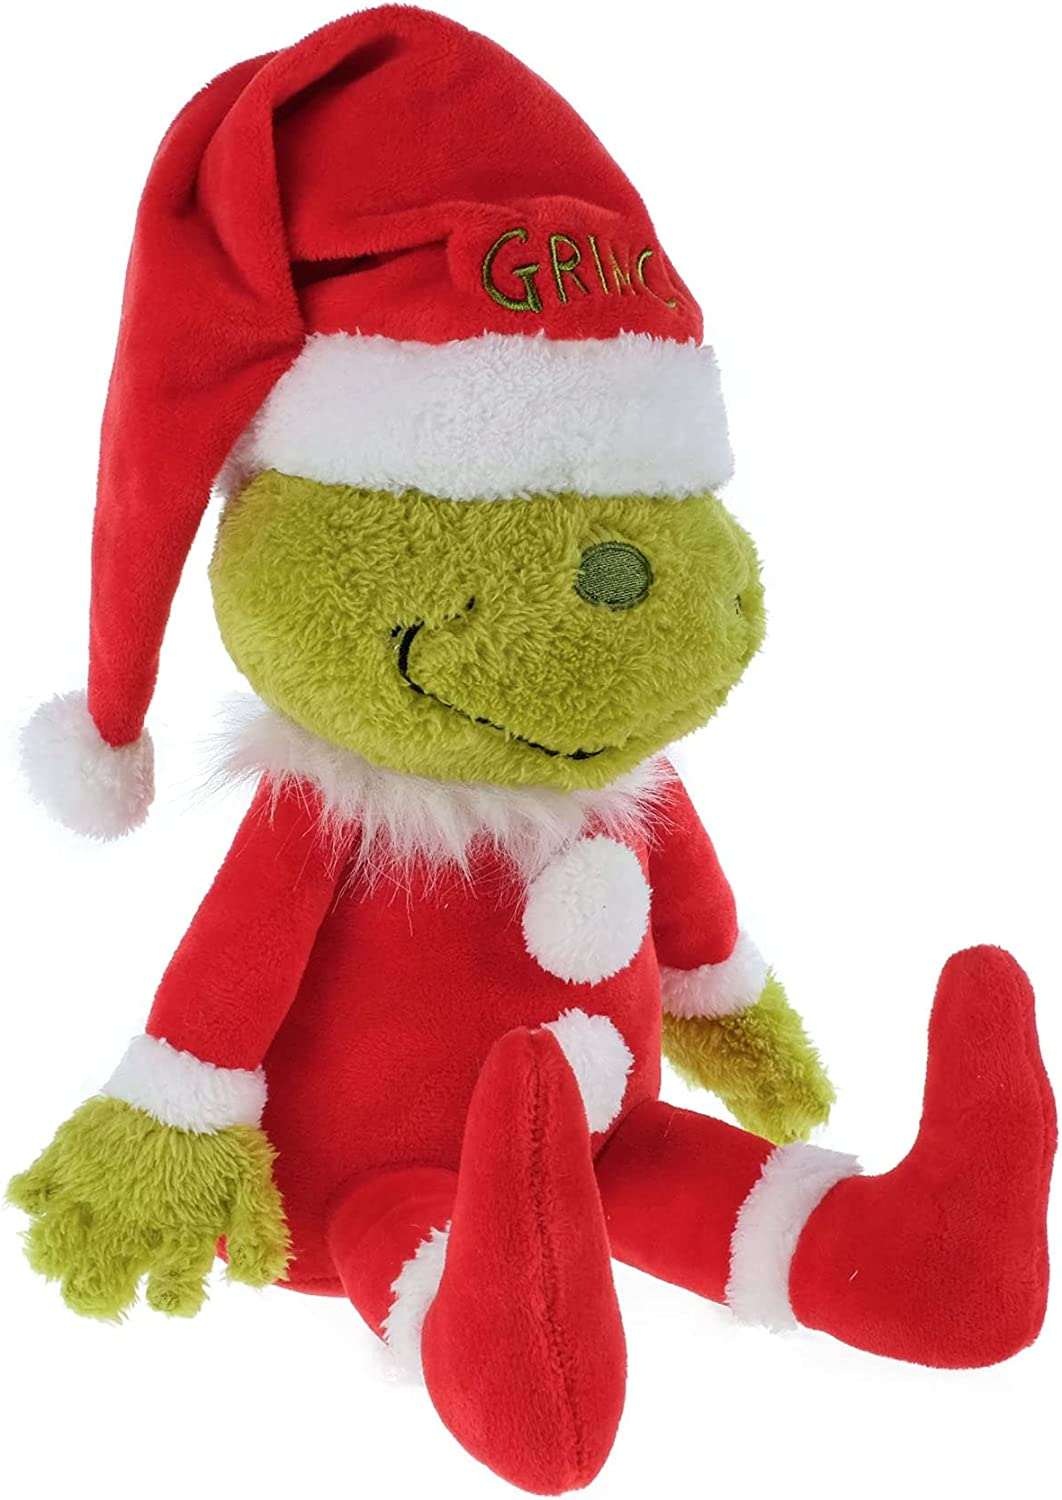 The Grinch Who Stole Christmas 14 Inch Grinch Plush Stuffed Animal